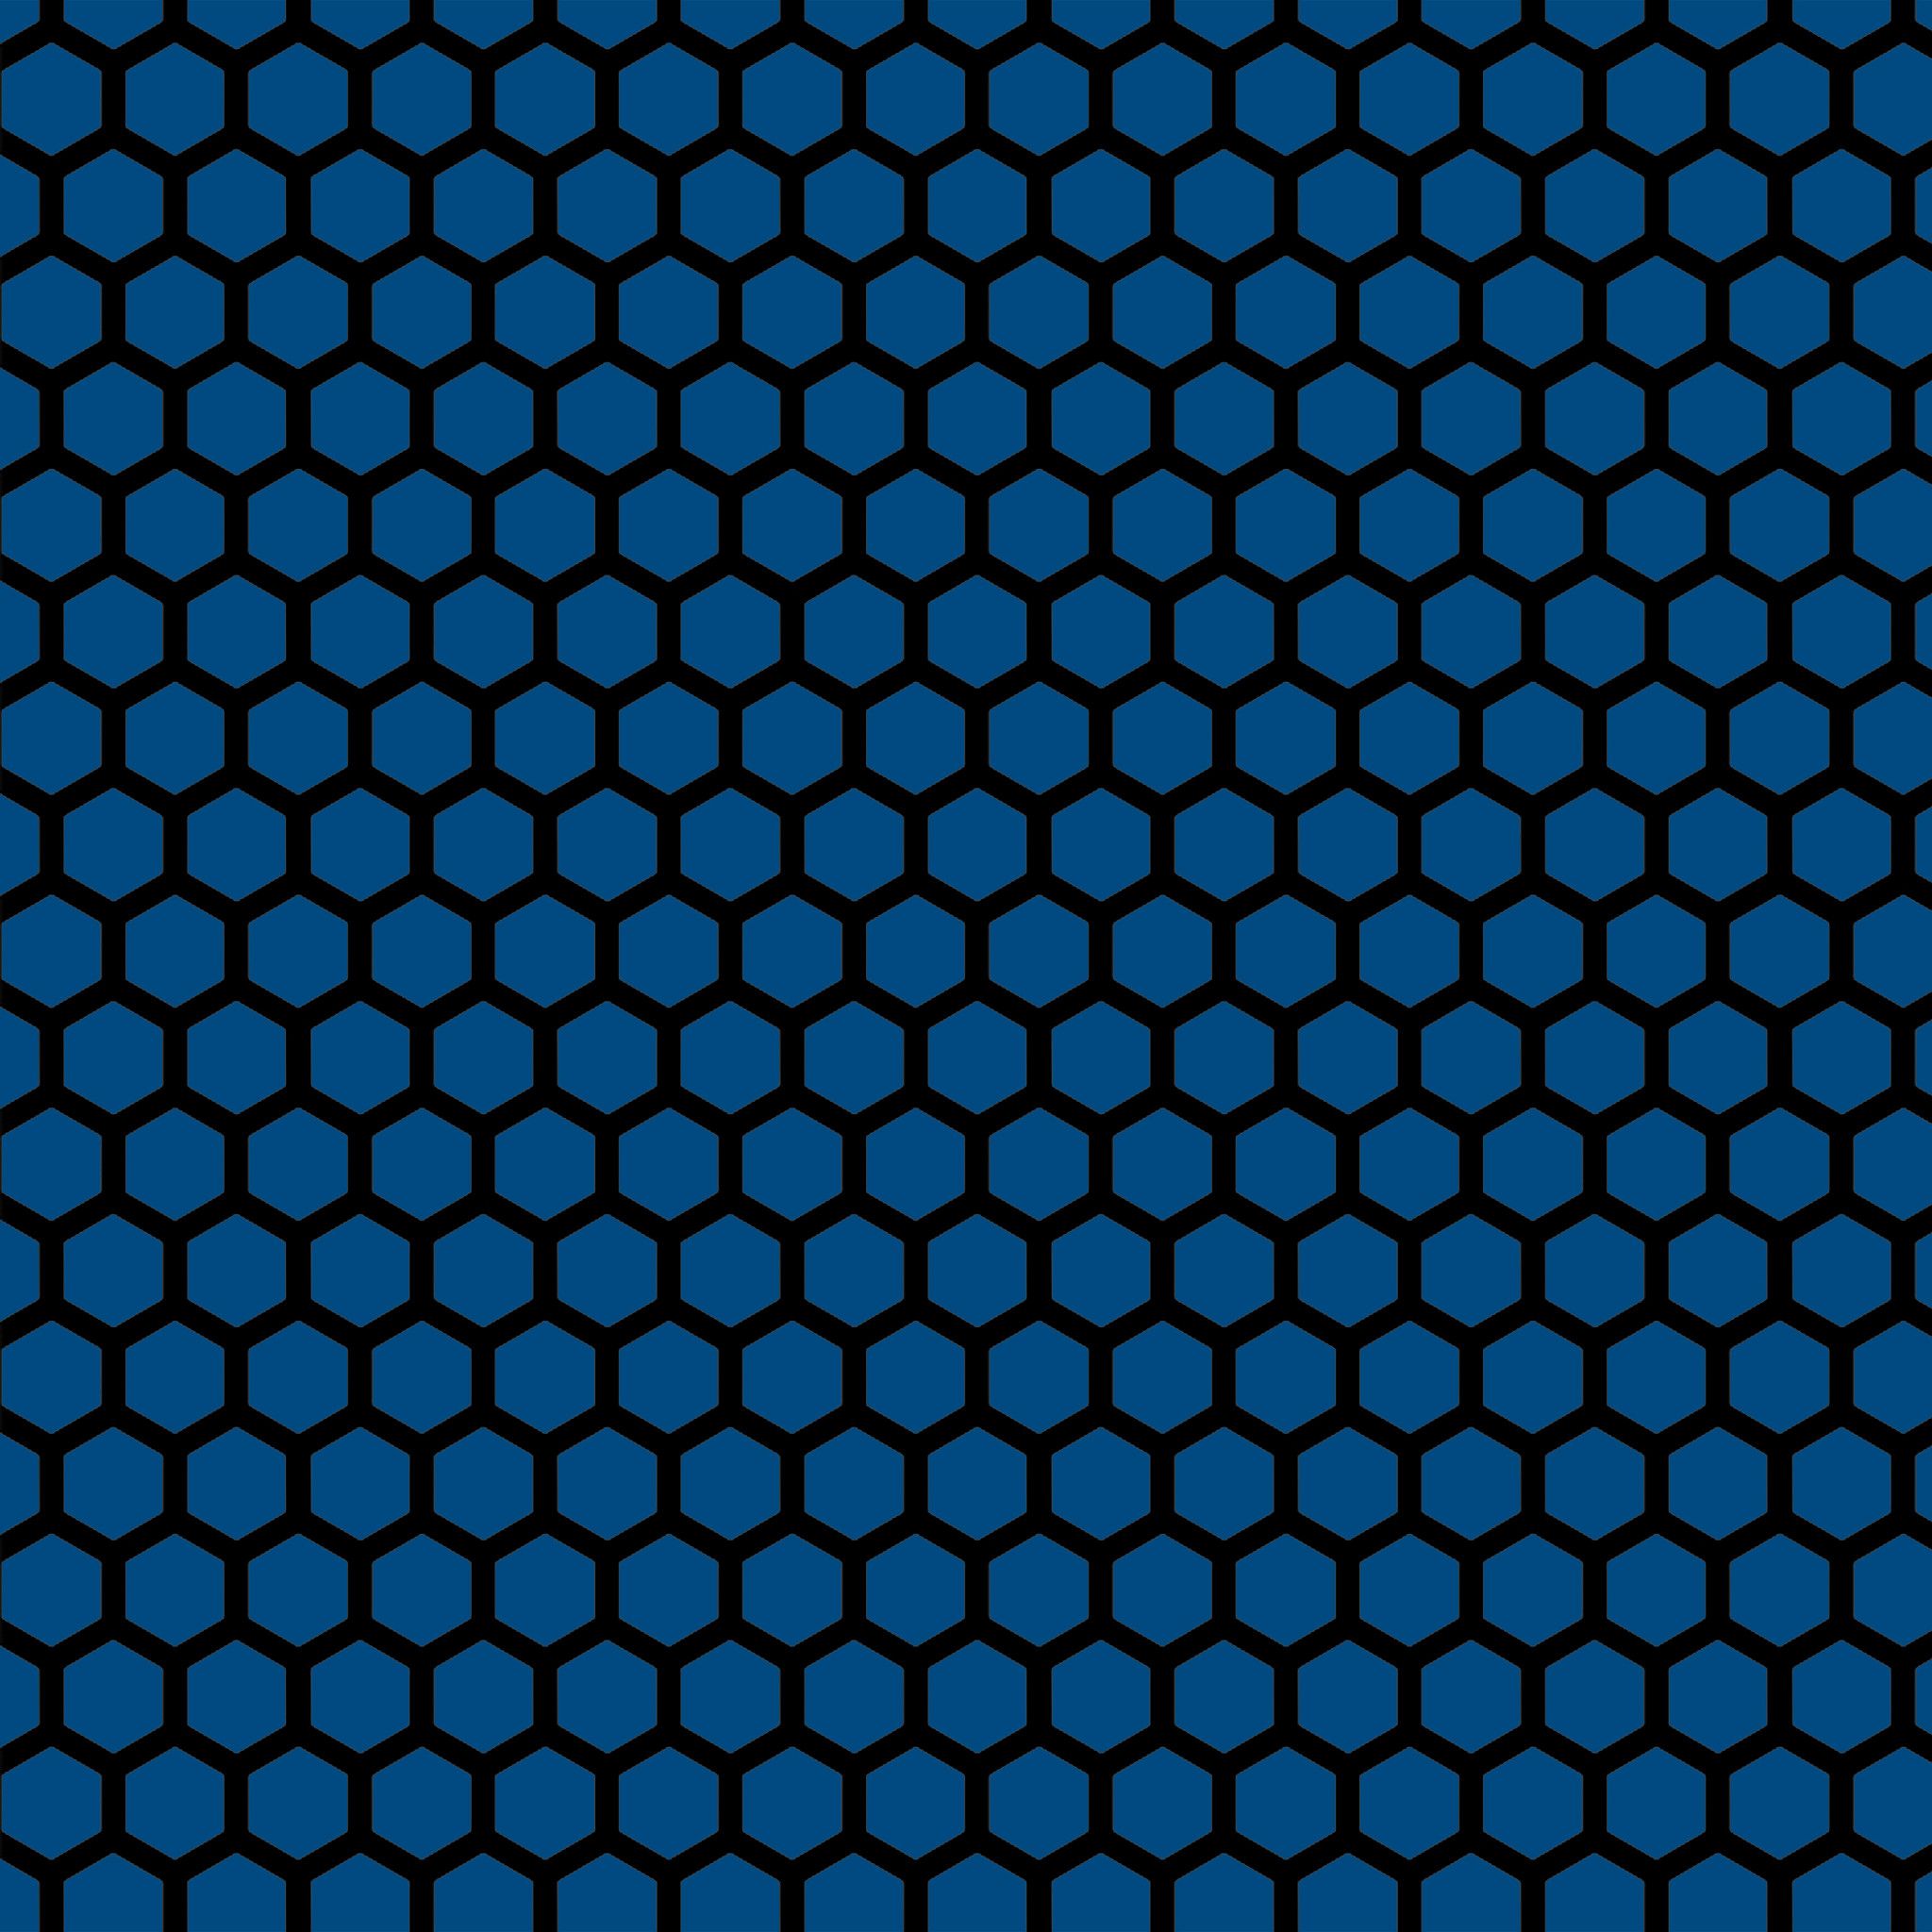 Blue hexagon pattern pictures | Inspired-progress.com - Free Images